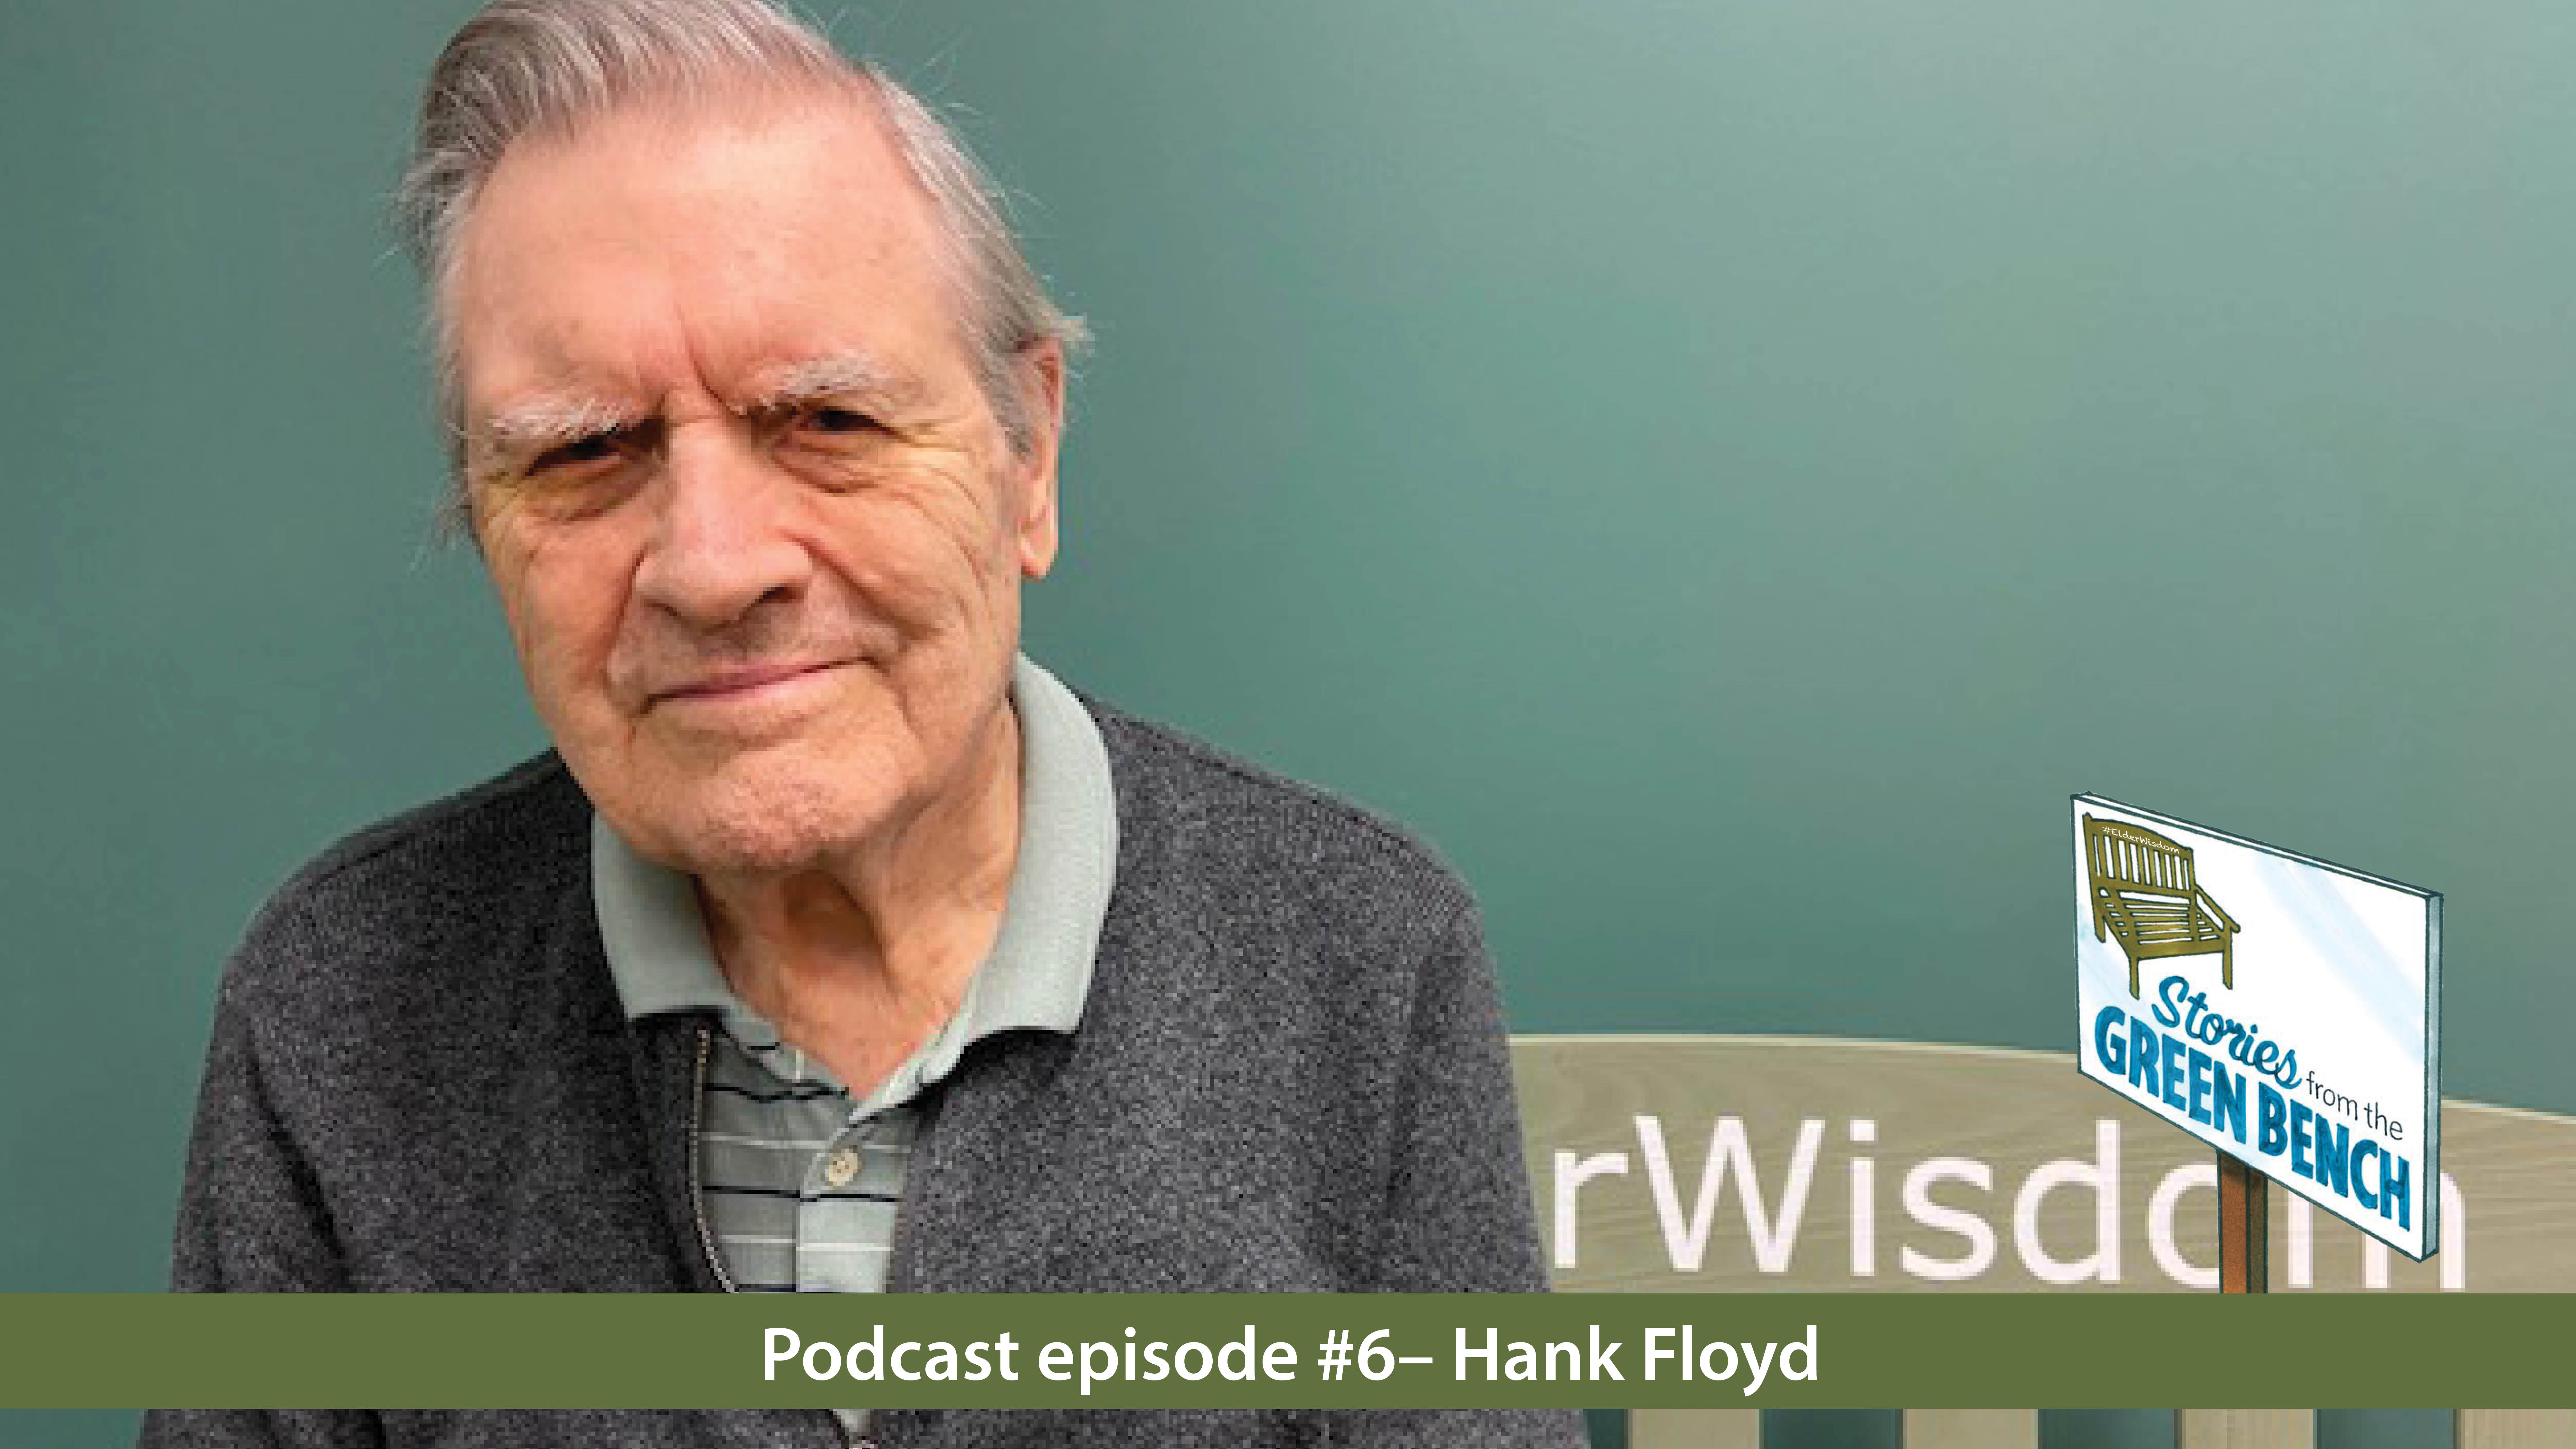 Hank Floyd on the #ElderWisdom bench for the stories from the green bench podcast